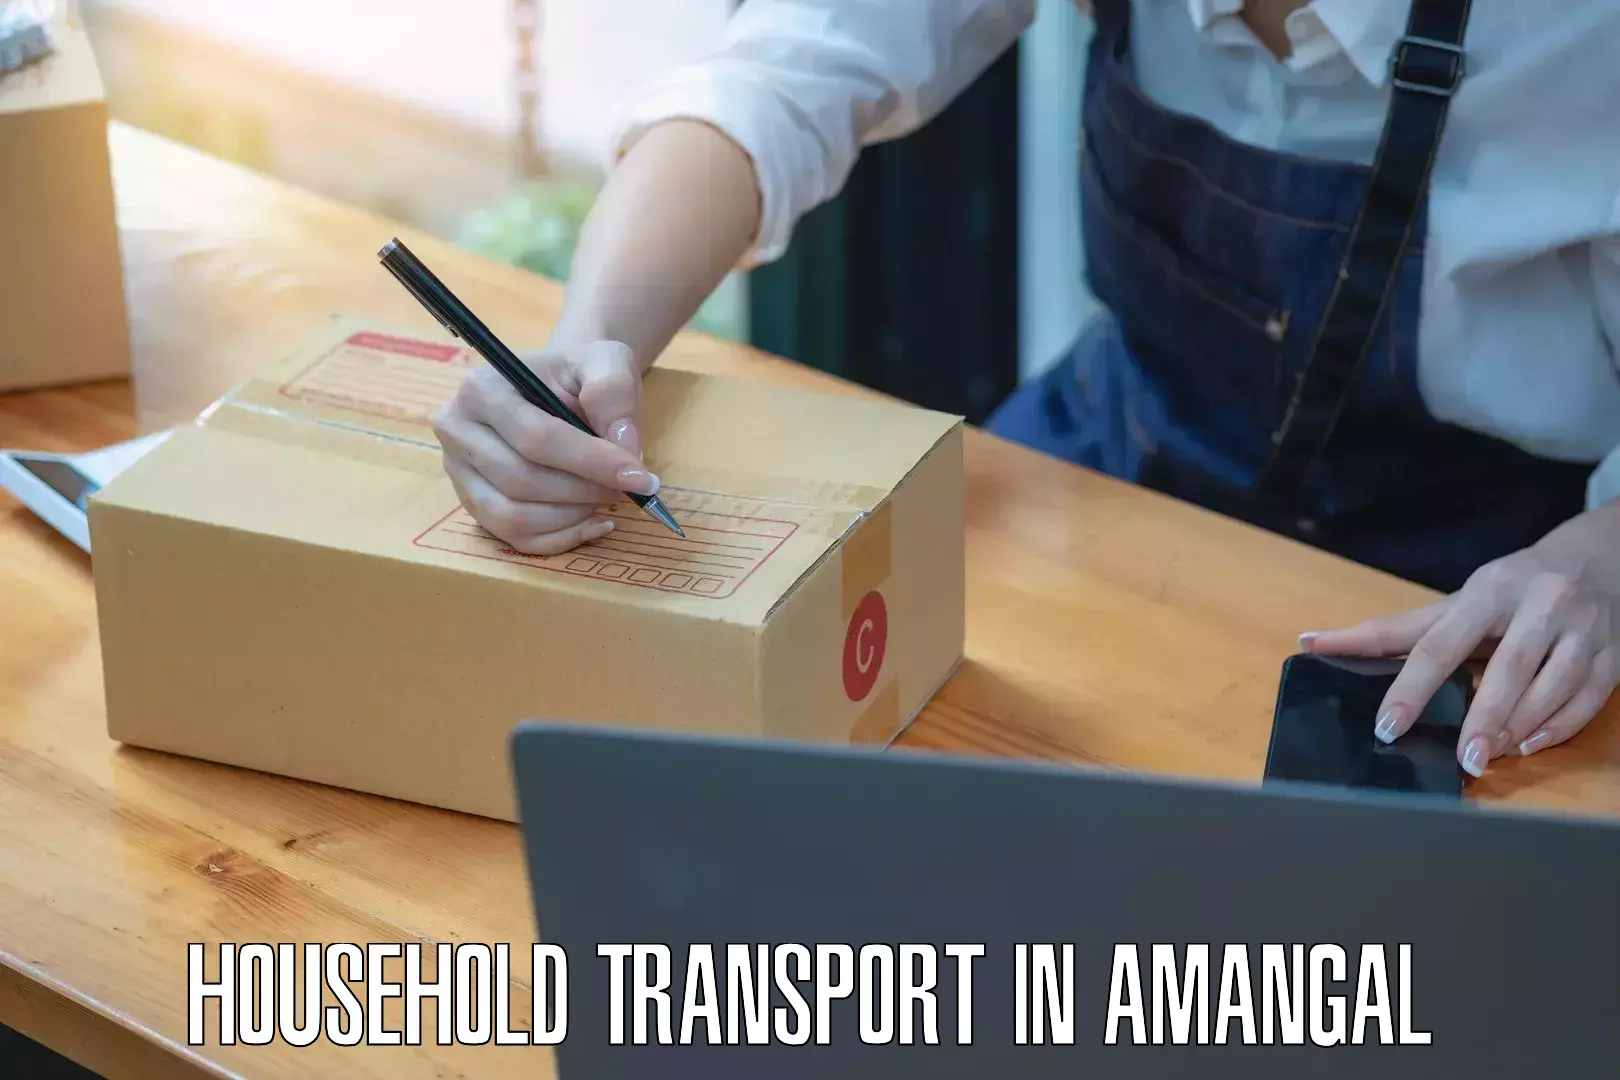 Reliable furniture transport in Amangal